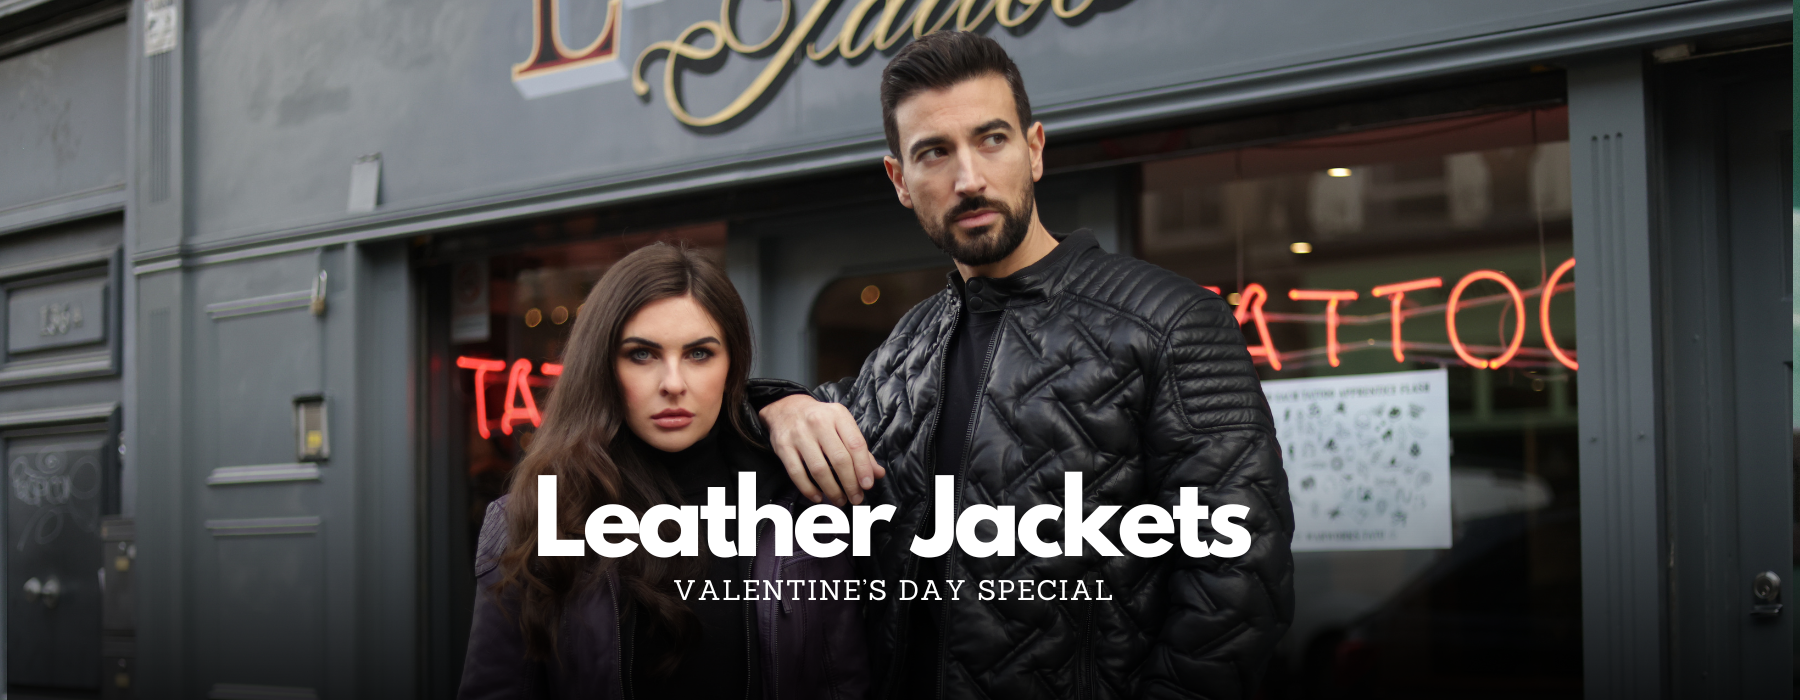 Love in Leather Jackets: Styling Tips for a Romantic Valentine's Day Date